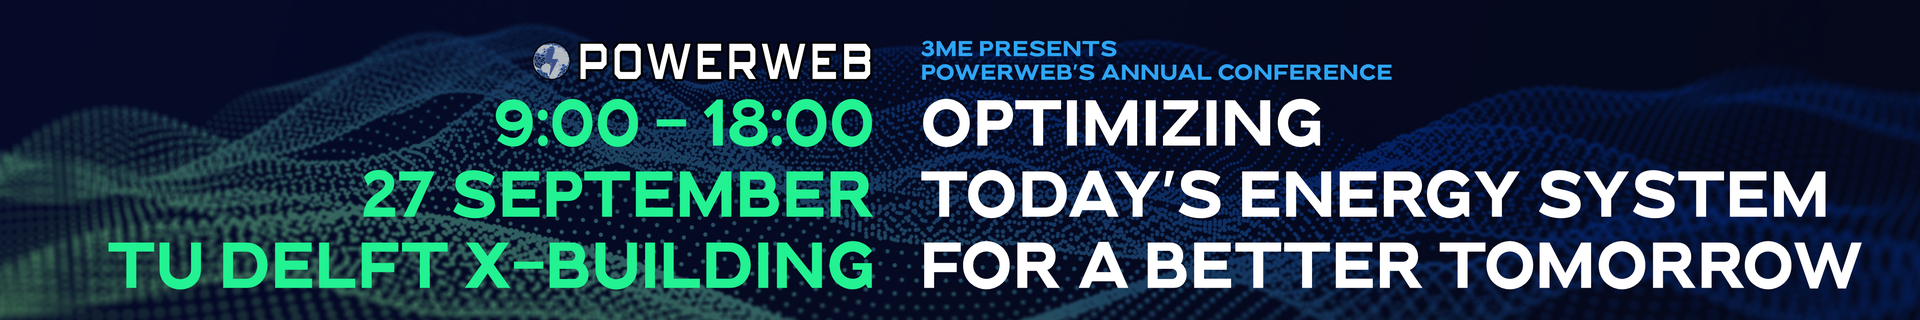 PowerWeb's Annual Conference: Optimizing Today's Energy System for a Better Tomorrow